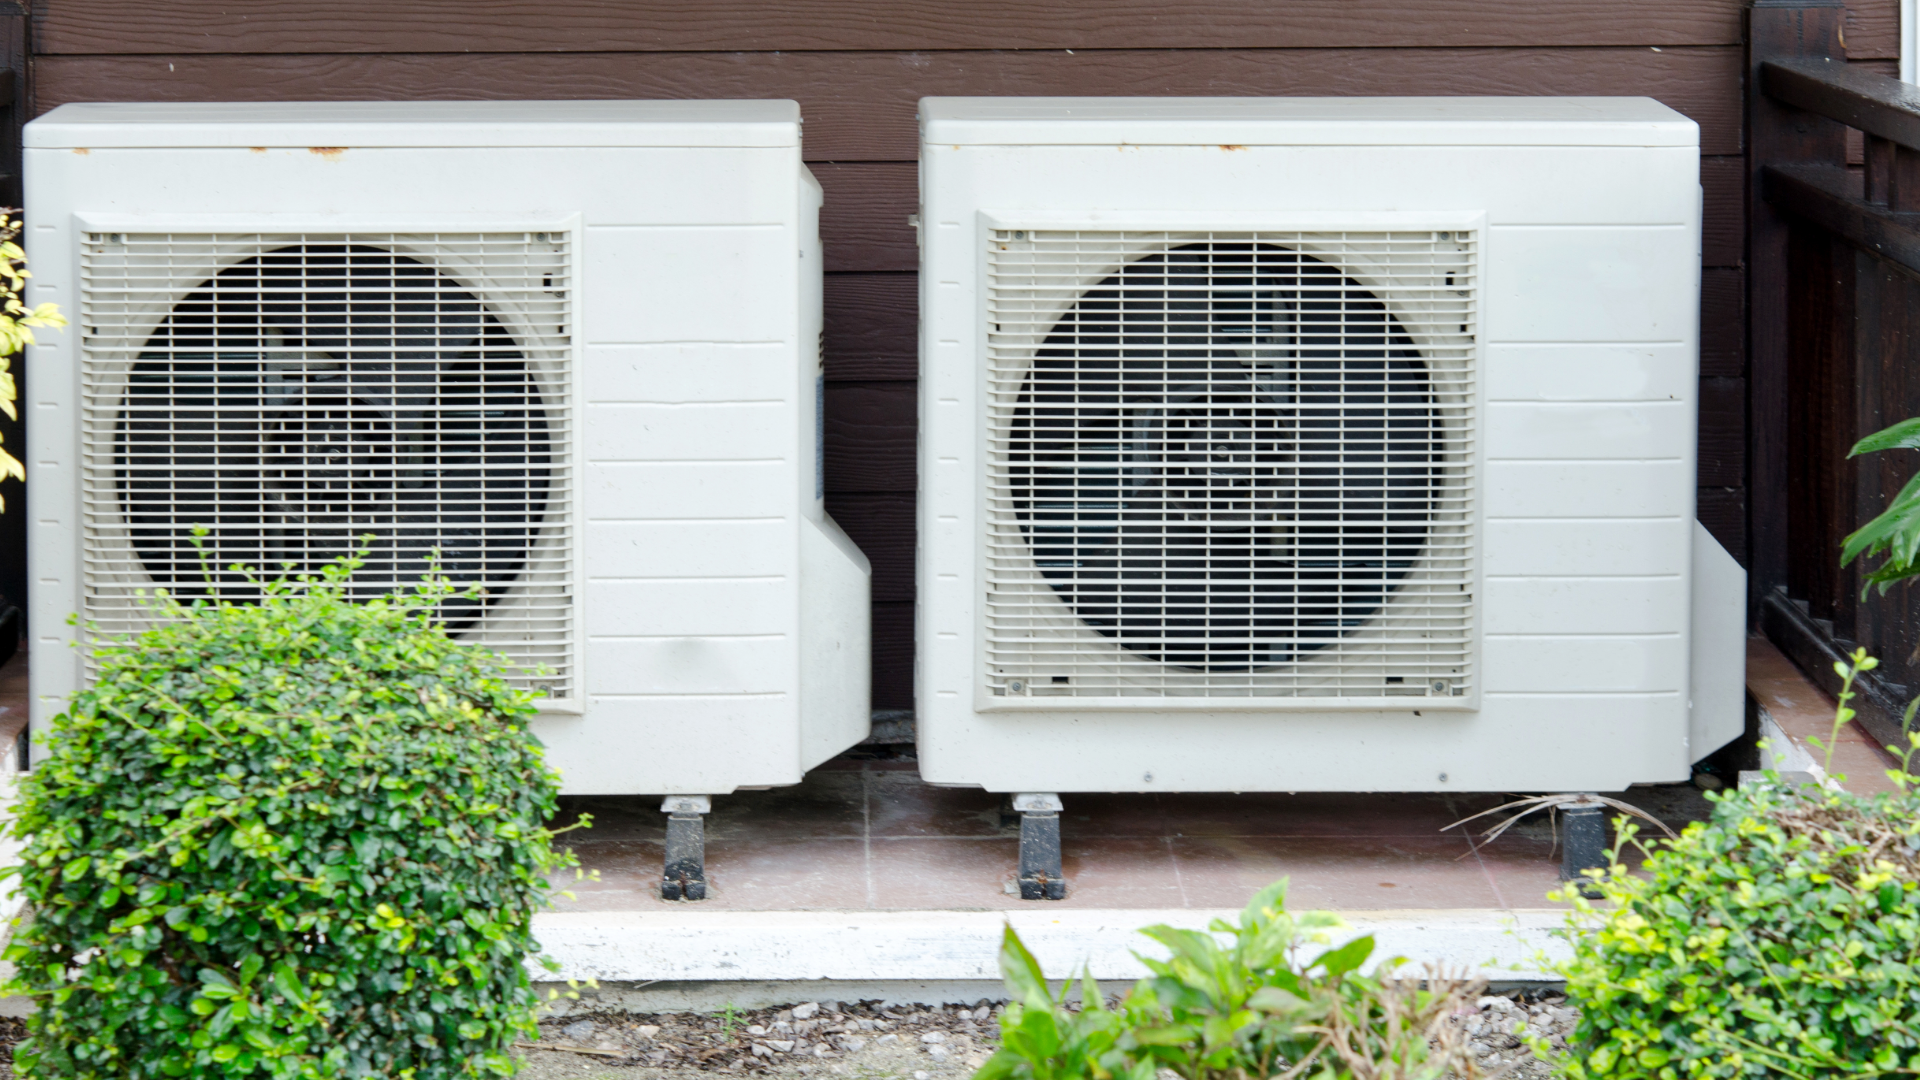 Getting Your Air Conditioner Ready for Spring